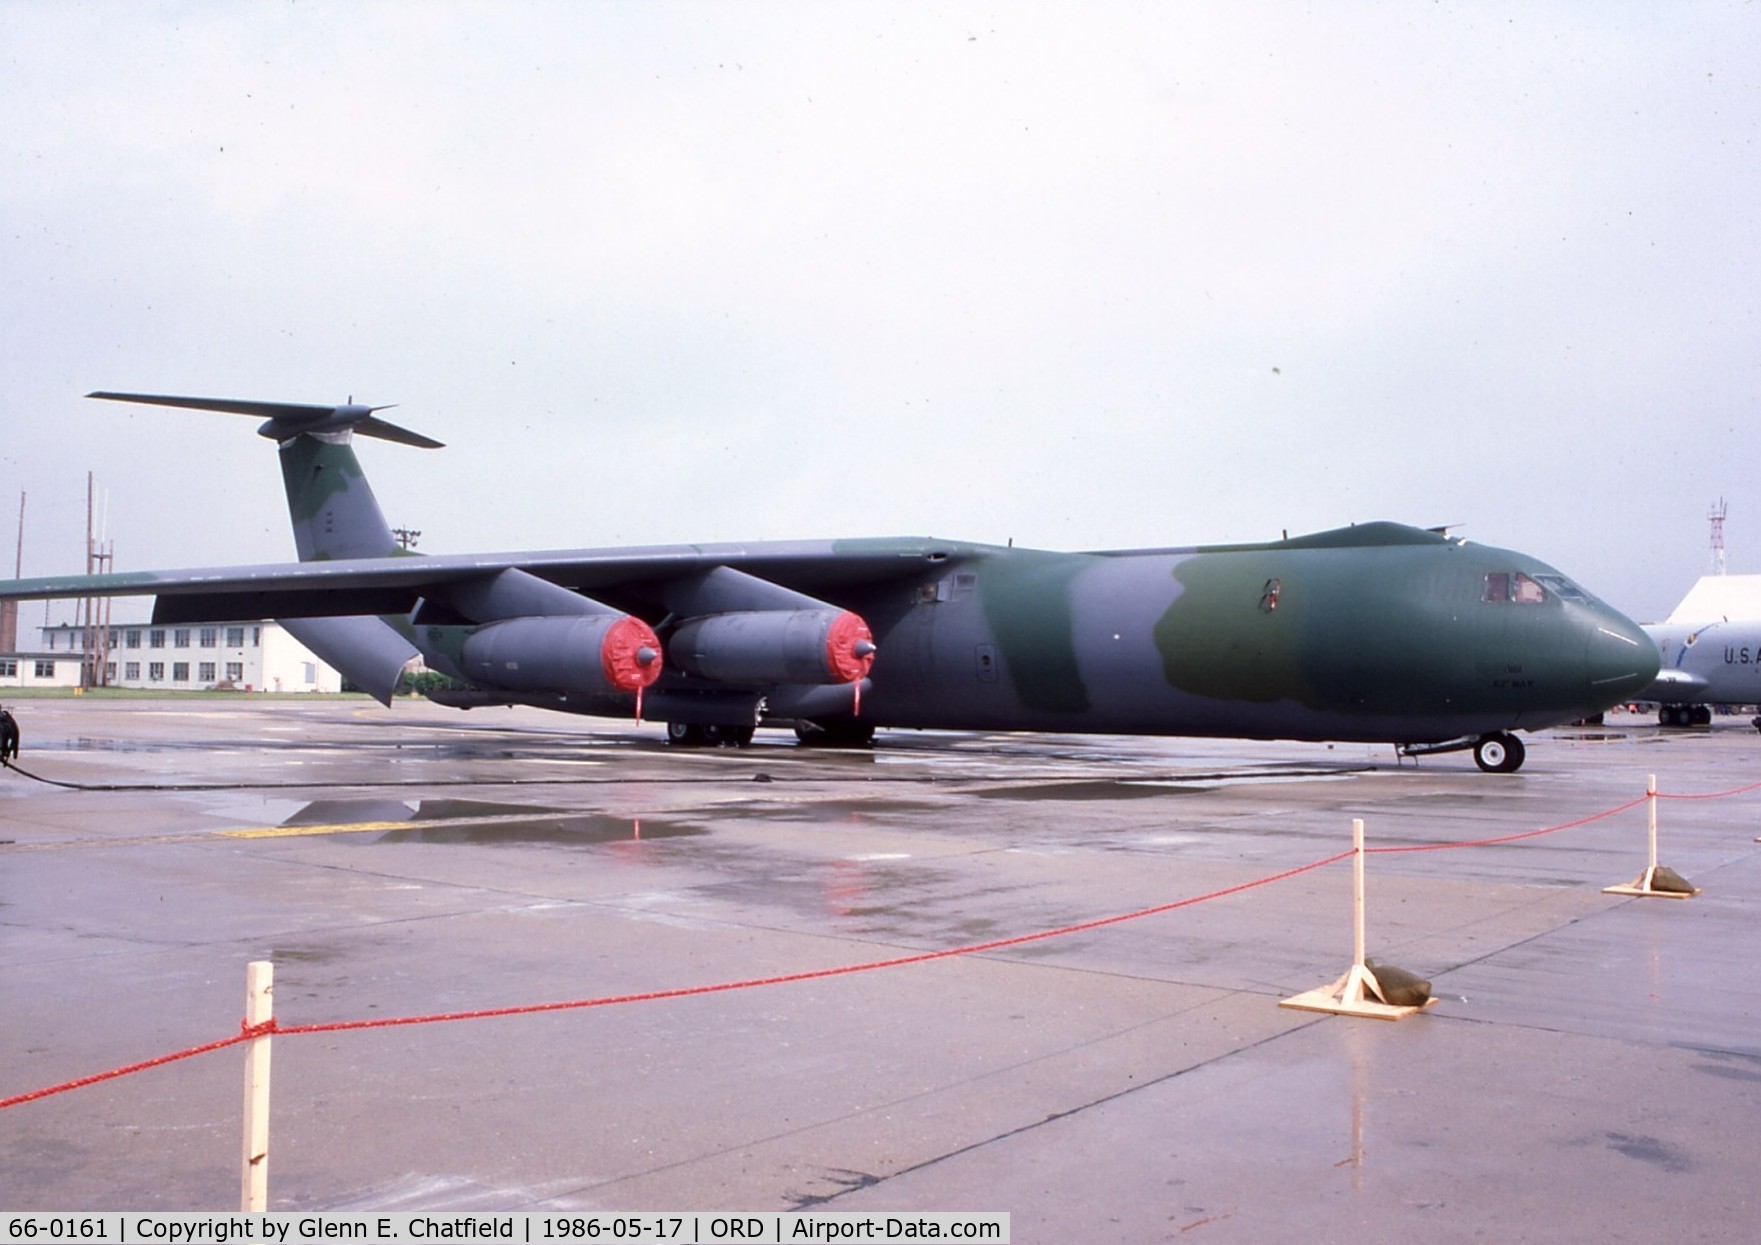 66-0161, 1966 Lockheed C-141B-LM Starlifter C/N 300-6187, C-141B at the open house